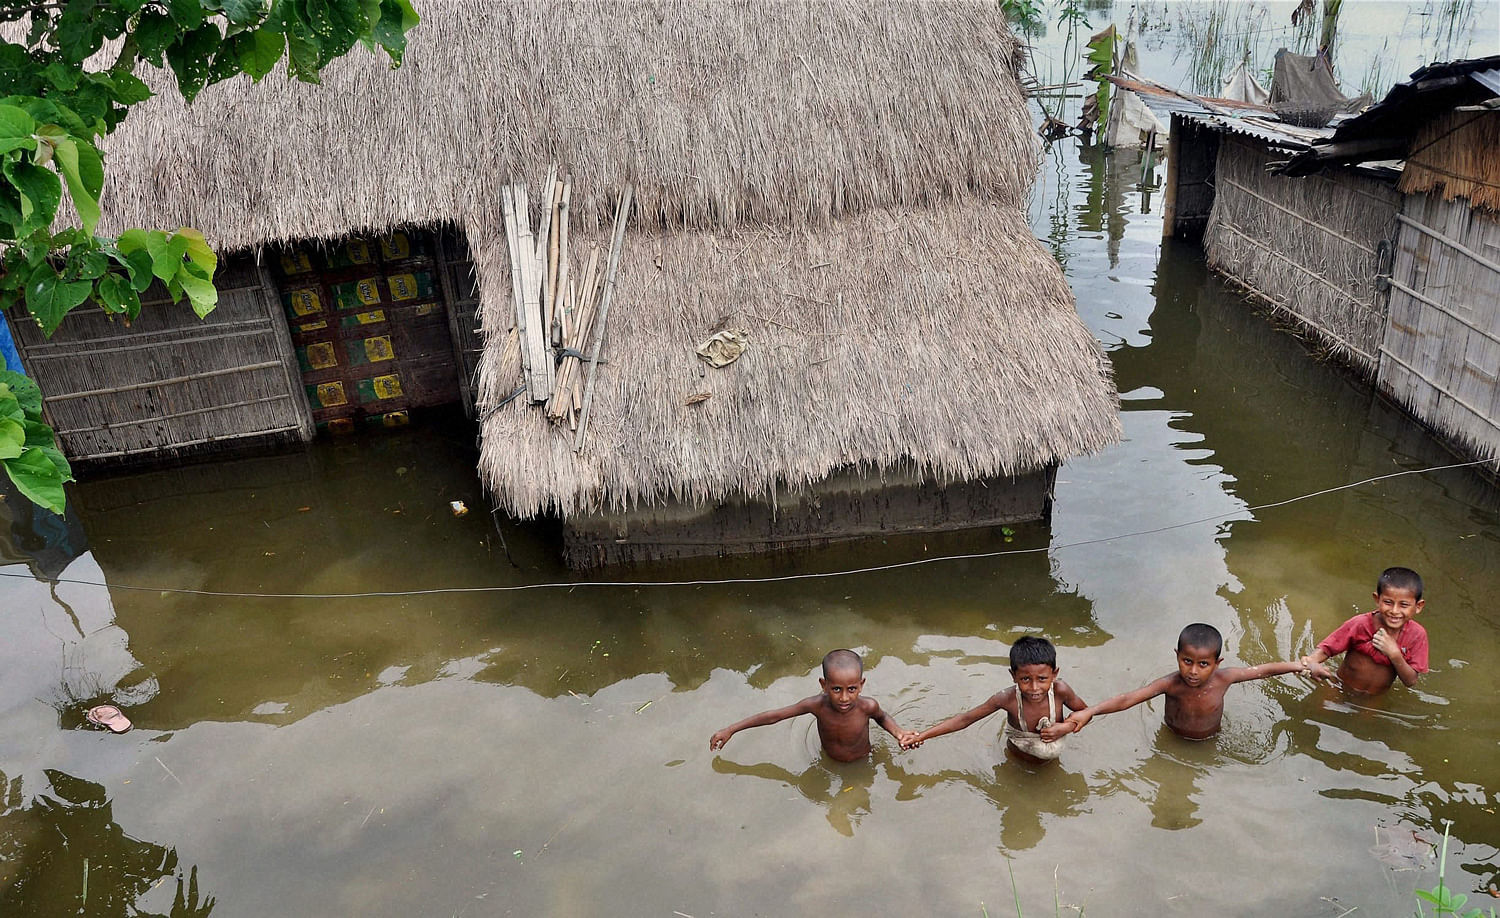 Children wade through water at Burabure near Moriagaon on Sunday. Heavy rainfall has flooded many villages in the Moriagaon district. PTI